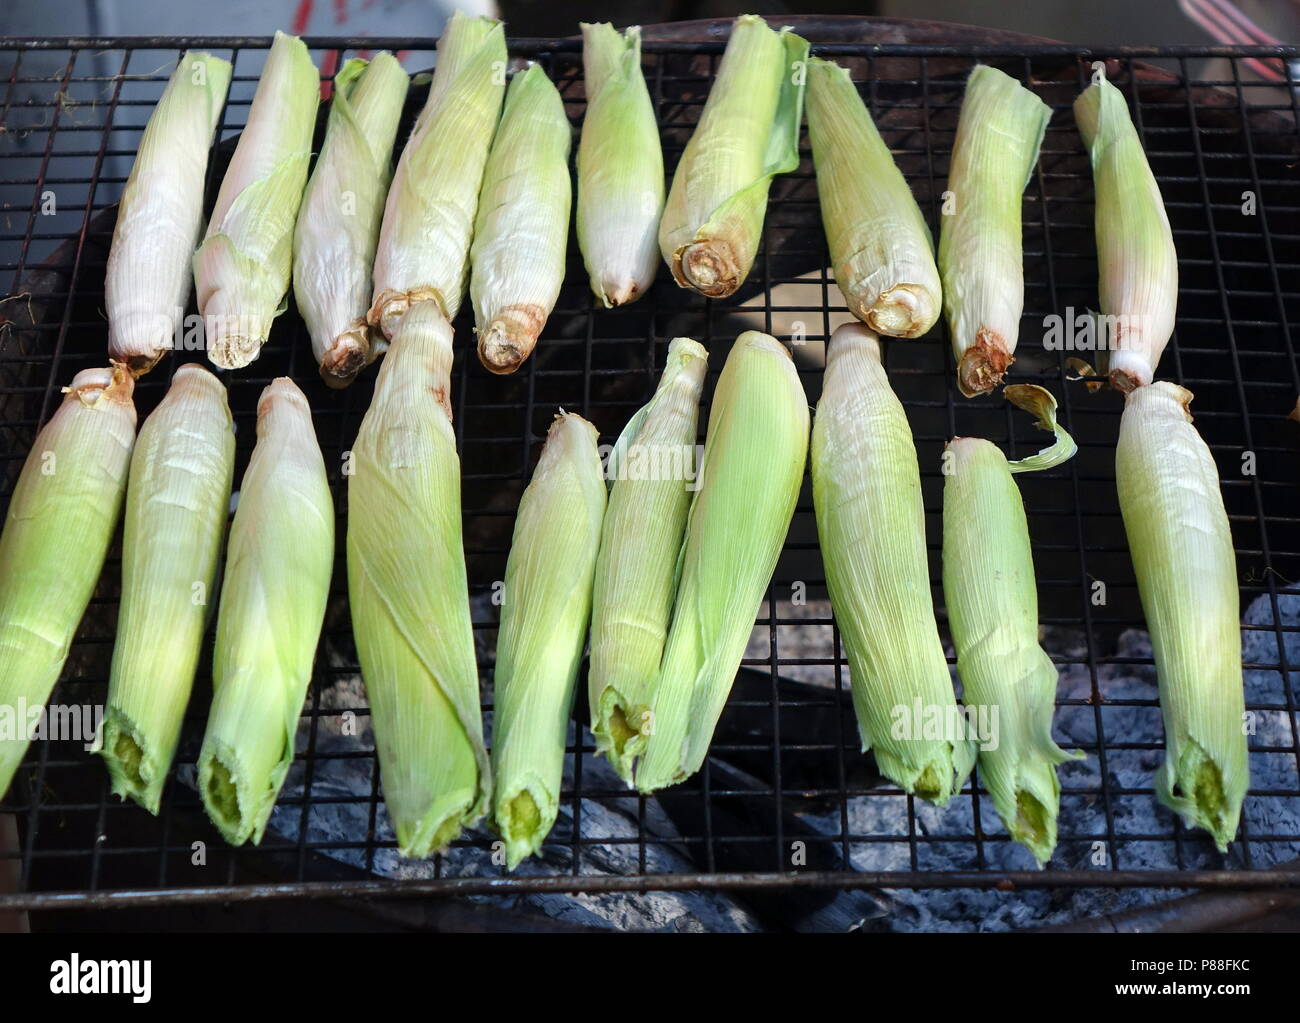 Baby corns are cooked on a charcoal grill Stock Photo